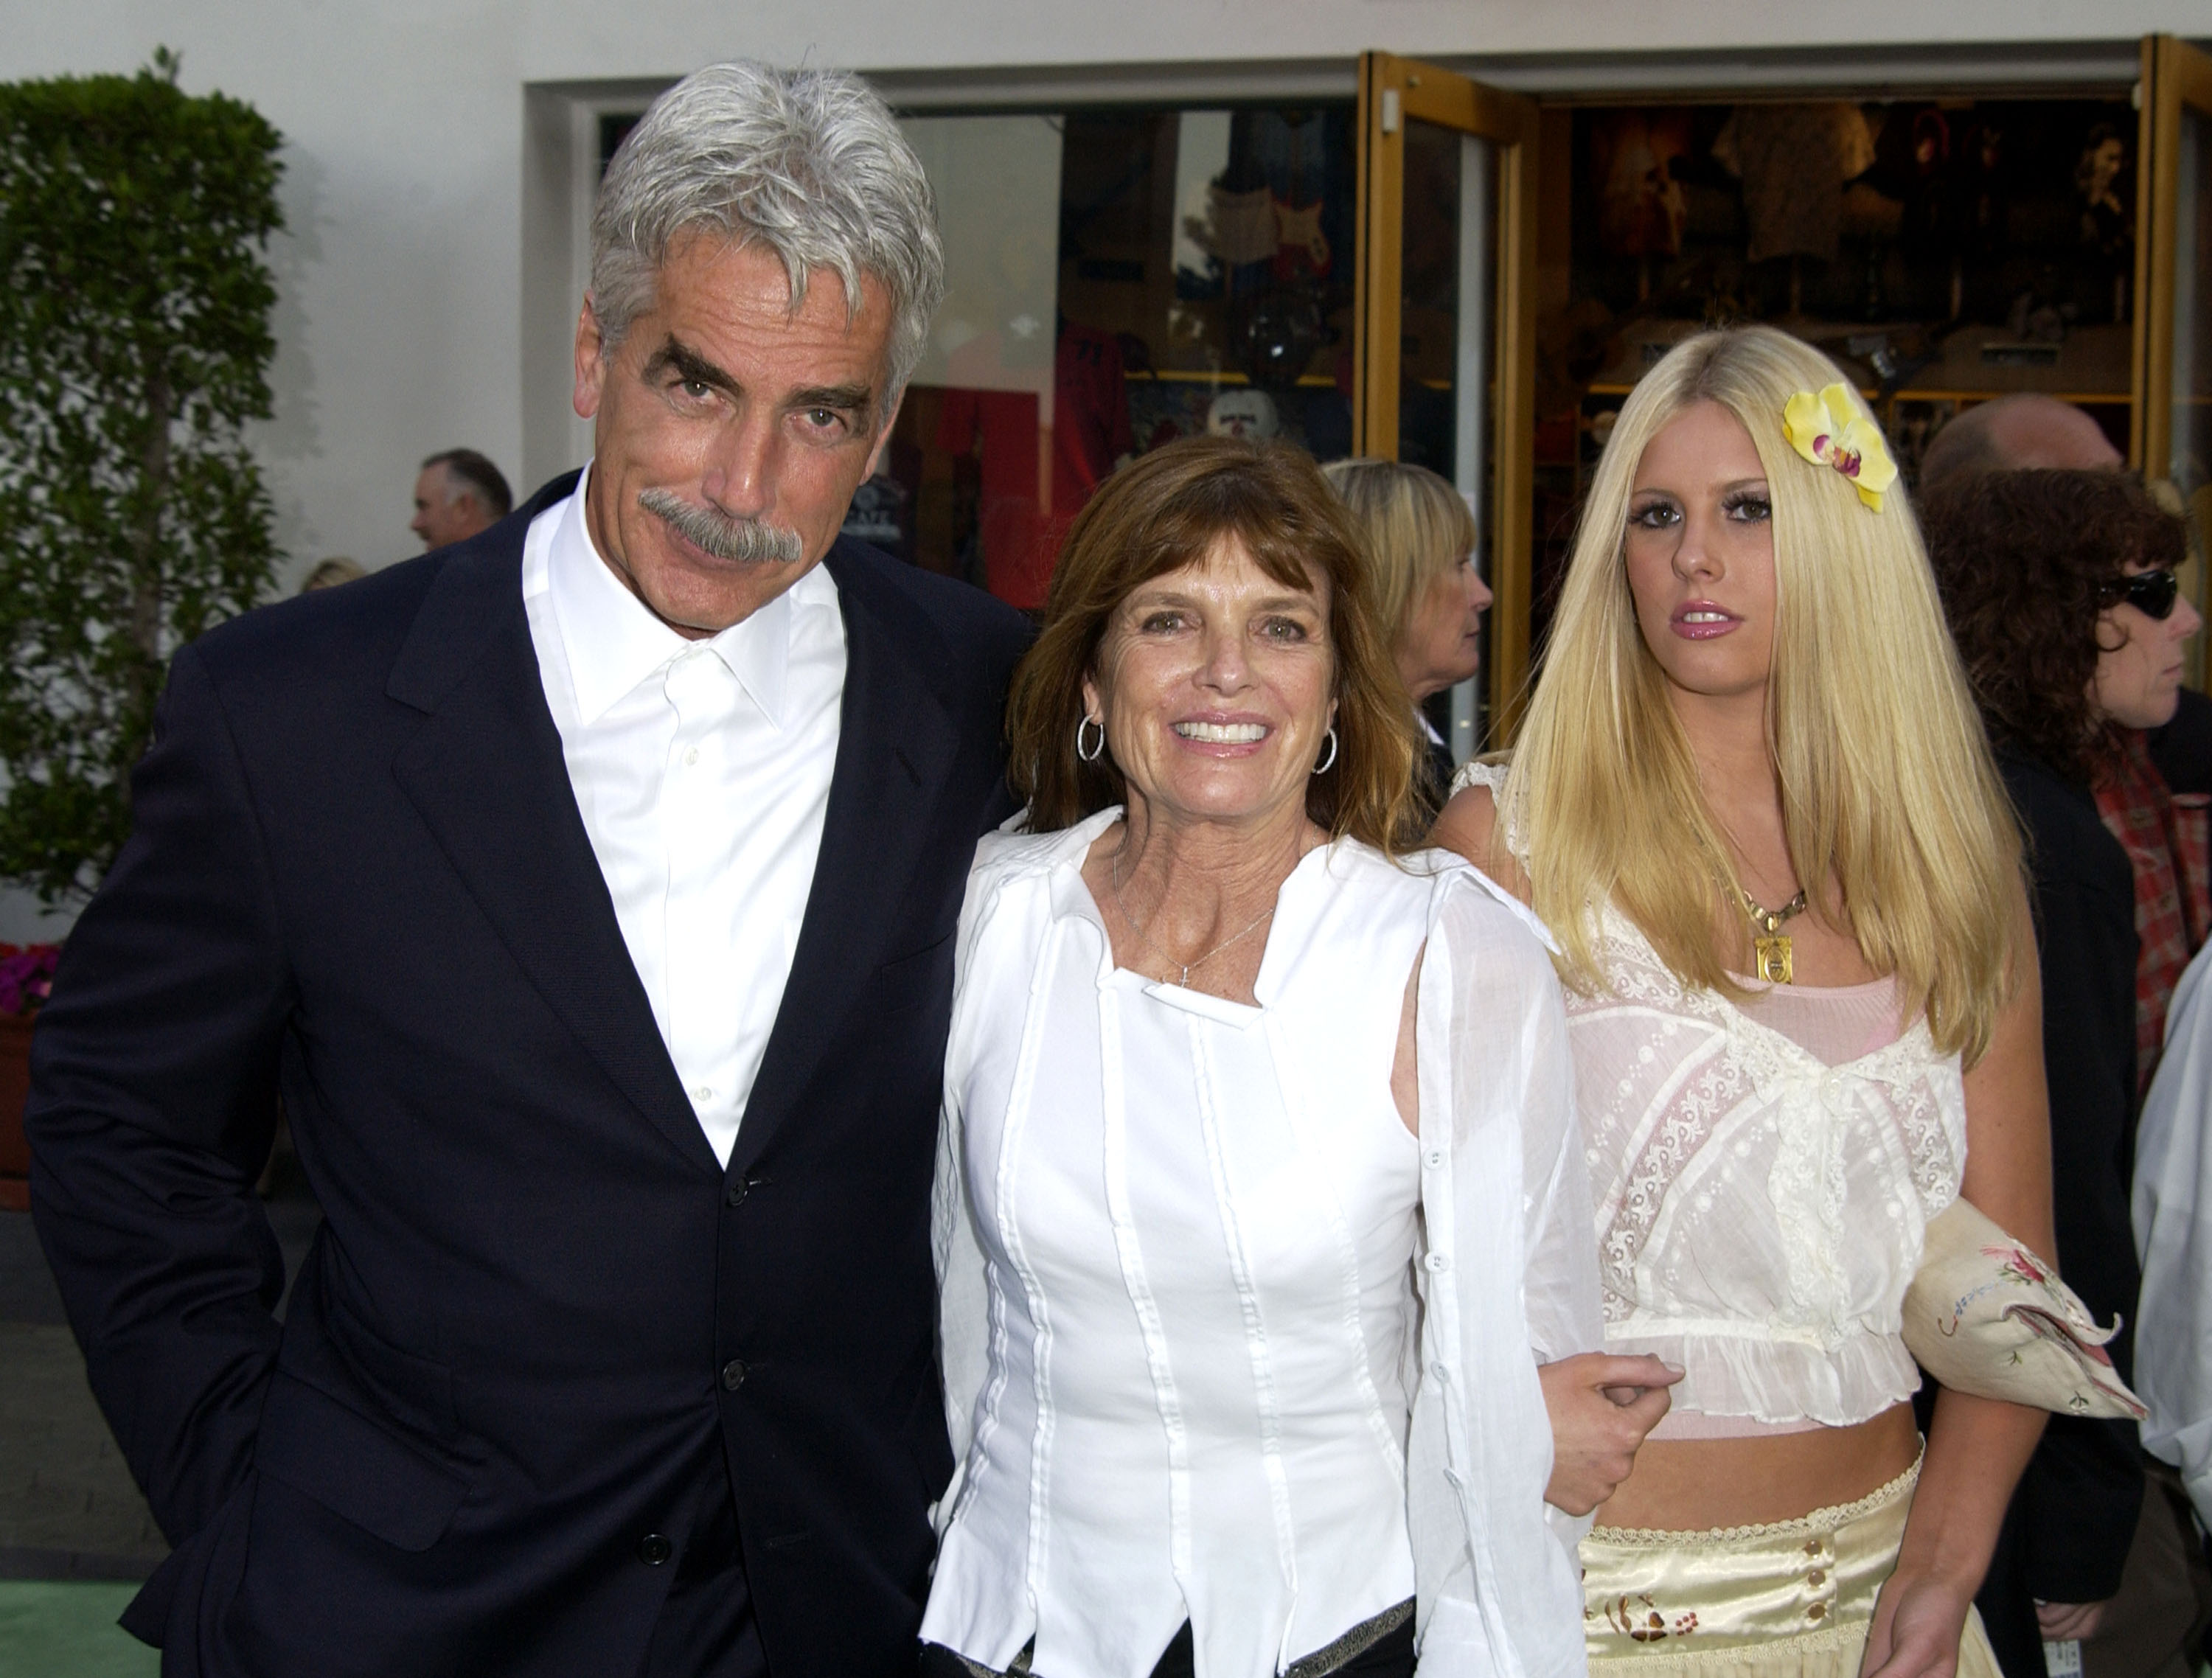 Sam Elliott, his wife Katherine Ross and their daughter Cleo at the World Premiere Of "The Hulk" in California in 2010 | Source: Getty Images